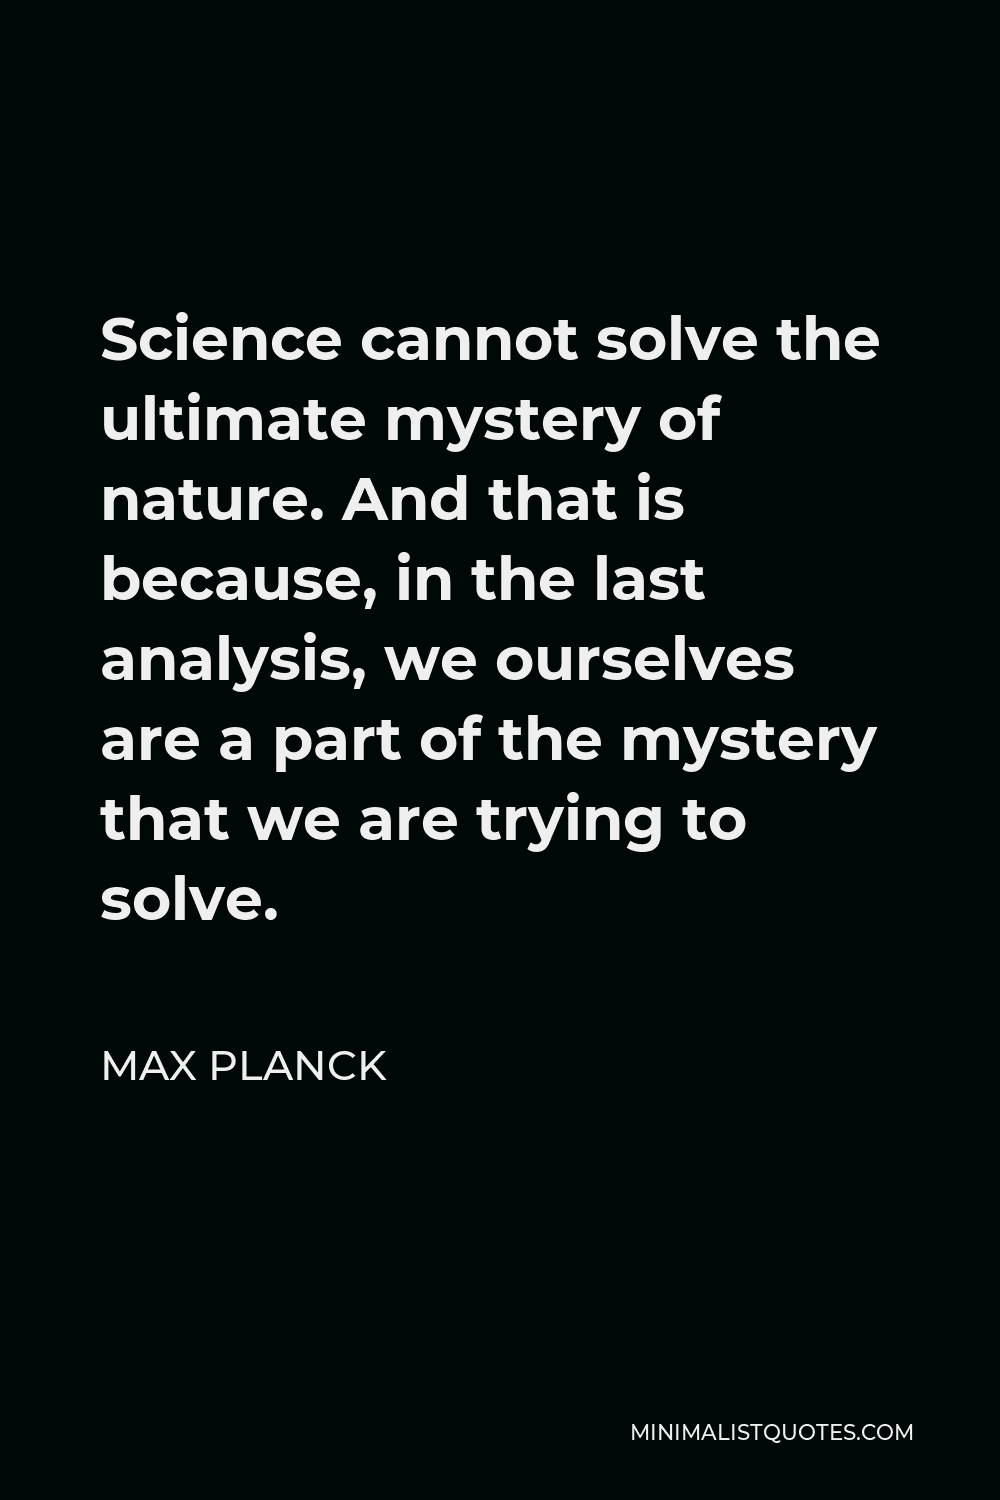 Max Planck Quote - Science cannot solve the ultimate mystery of nature. And that is because, in the last analysis, we ourselves are a part of the mystery that we are trying to solve.